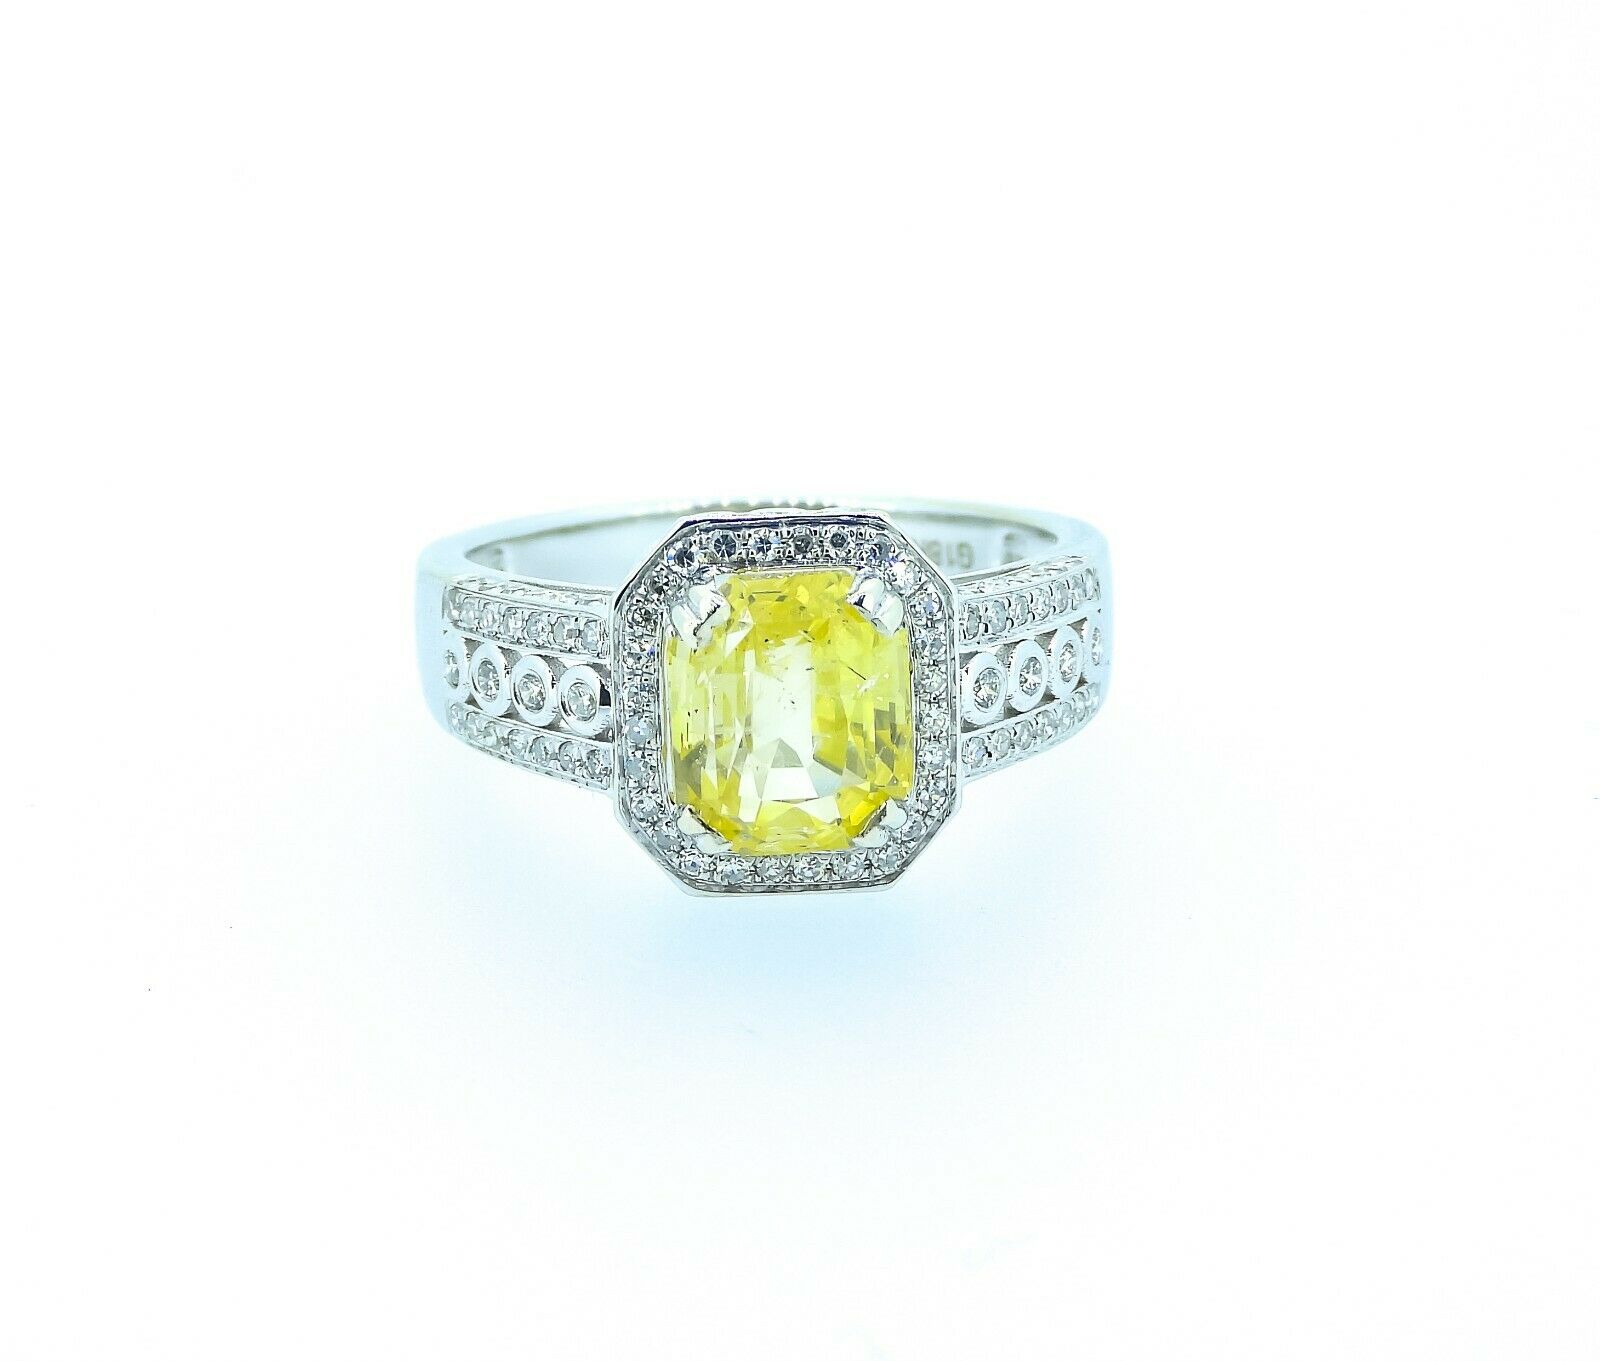 Certified 3.20 ct Yellow VVS Untreated Sapphire & Diamonds Ring - Image 4 of 8